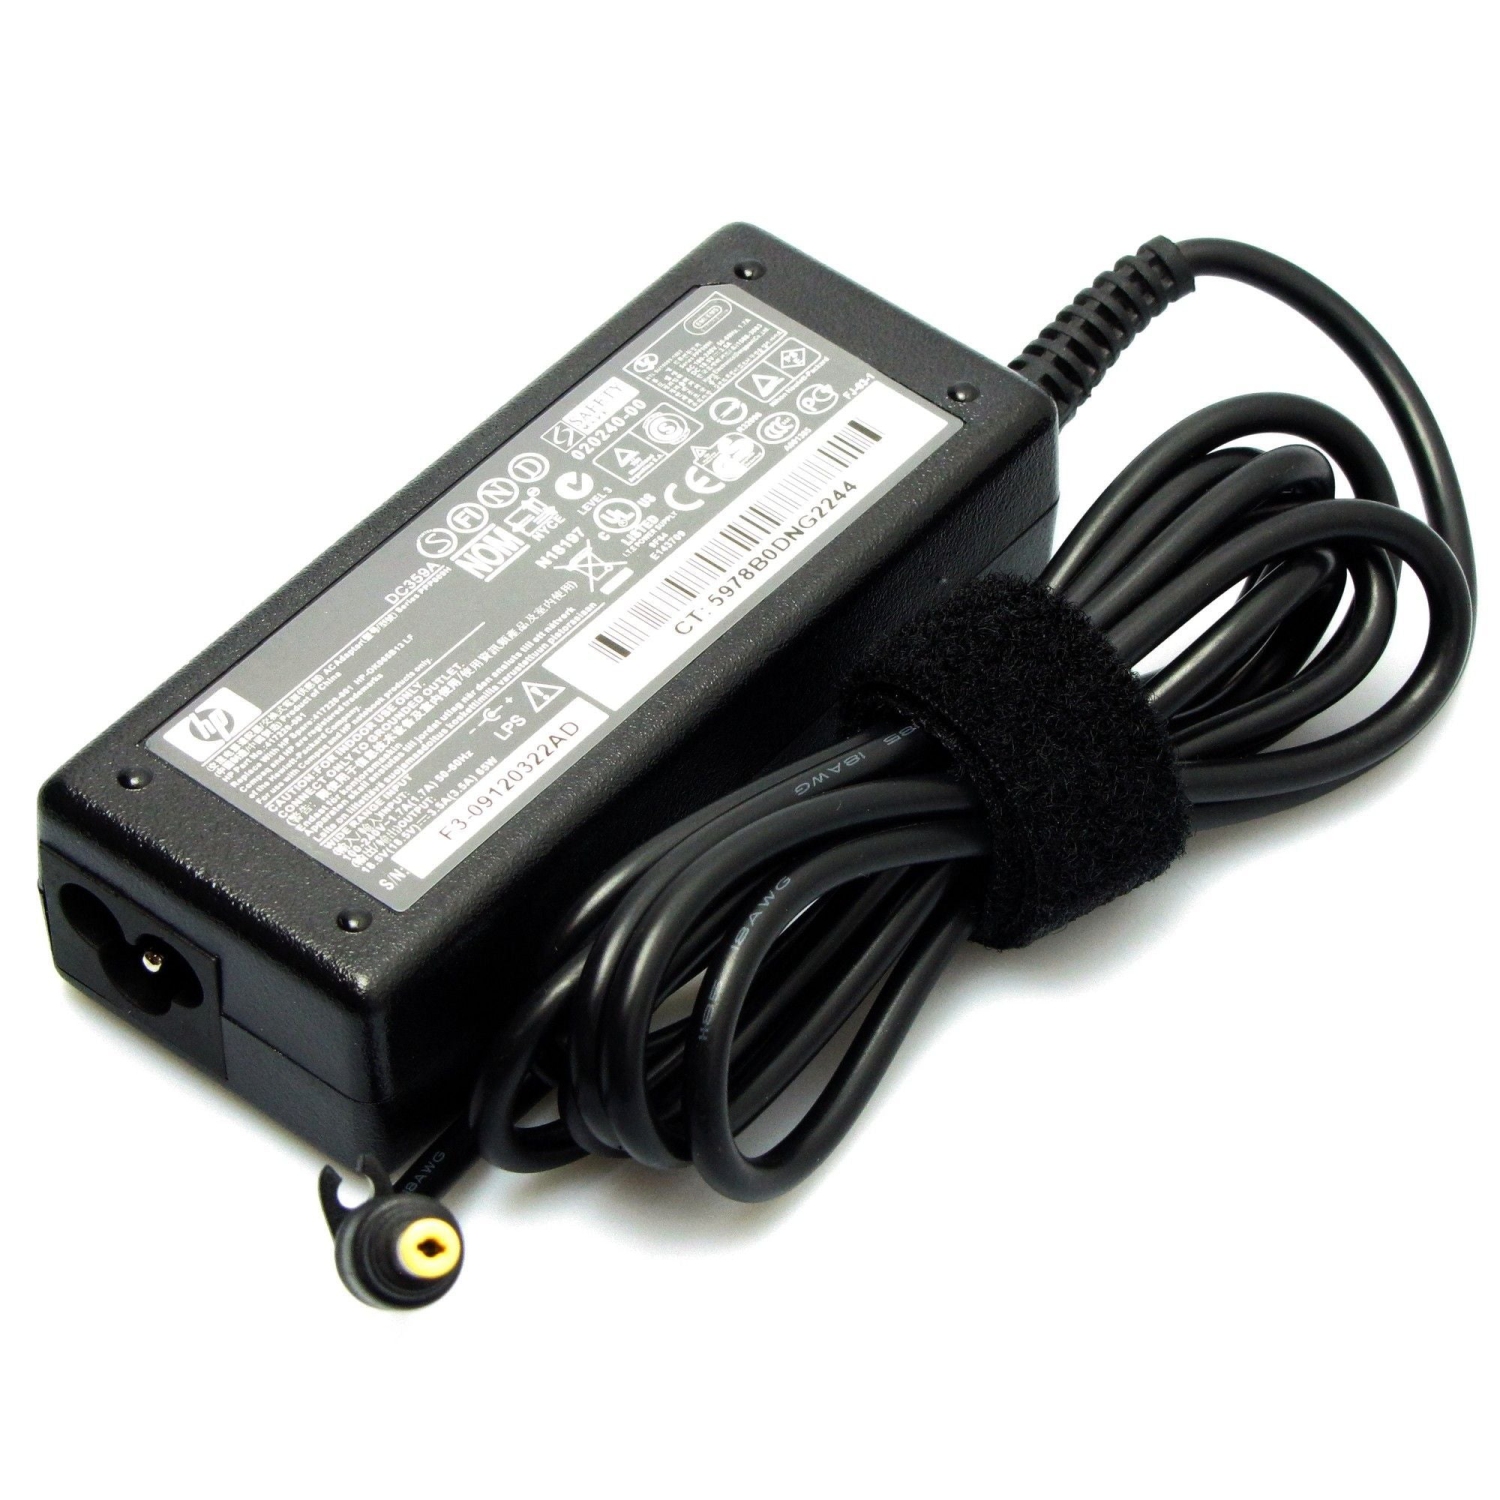 Refurbished (Good) Original HP Laptop Charger 65W (18.5V, 3.5A ) 4.8*1.7 mm connector Power Adapter Model PPP009H, PN: L89693-001